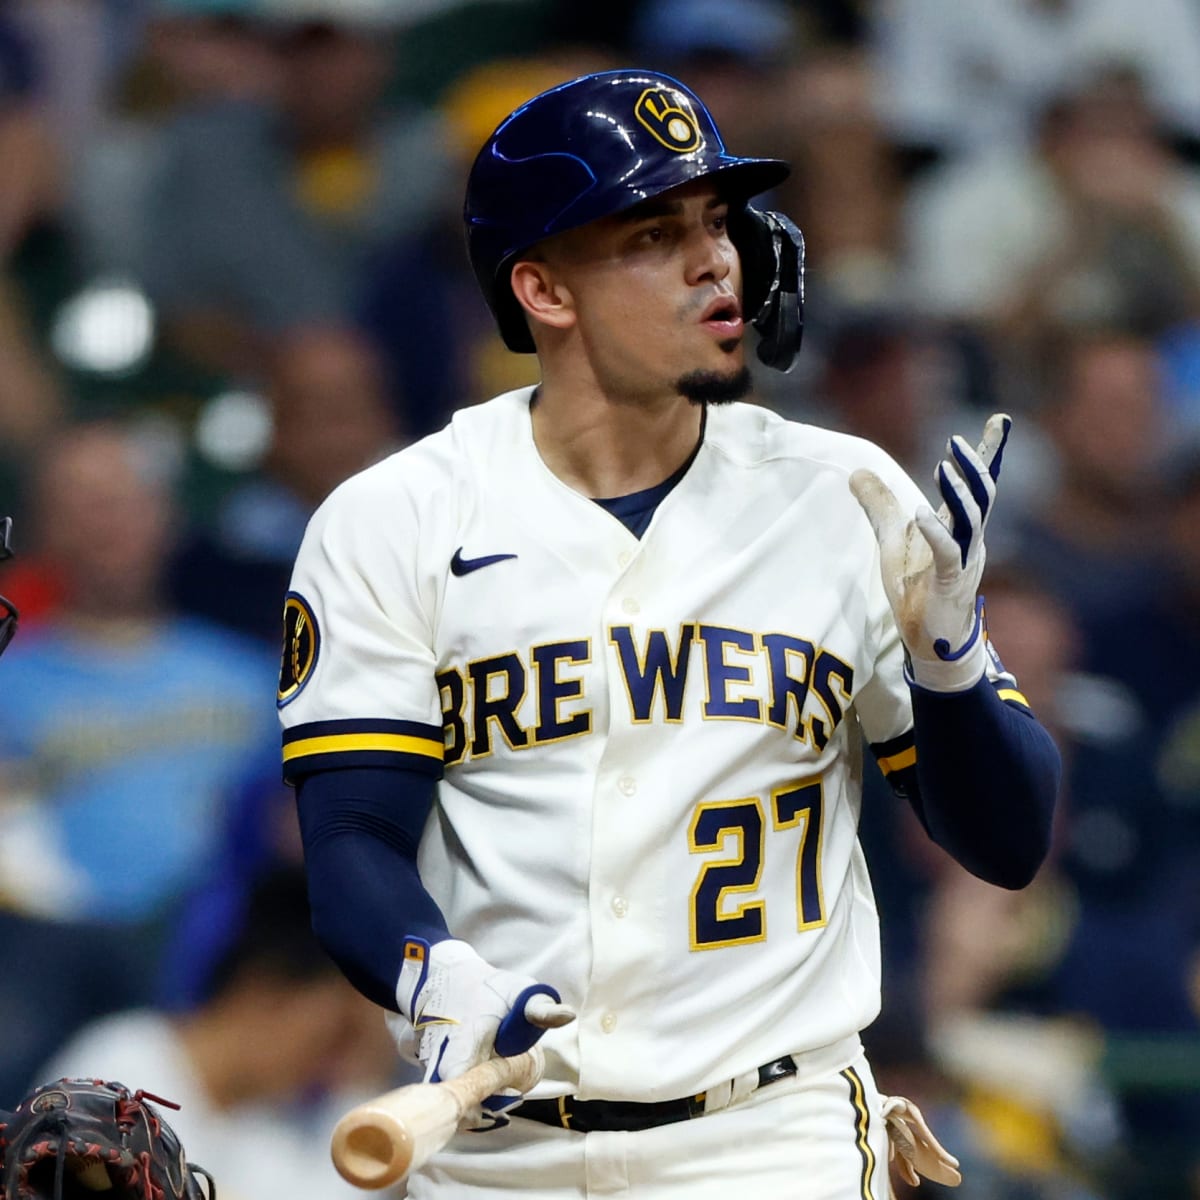 Milwaukee Brewers a part of rare playoff history first seen in